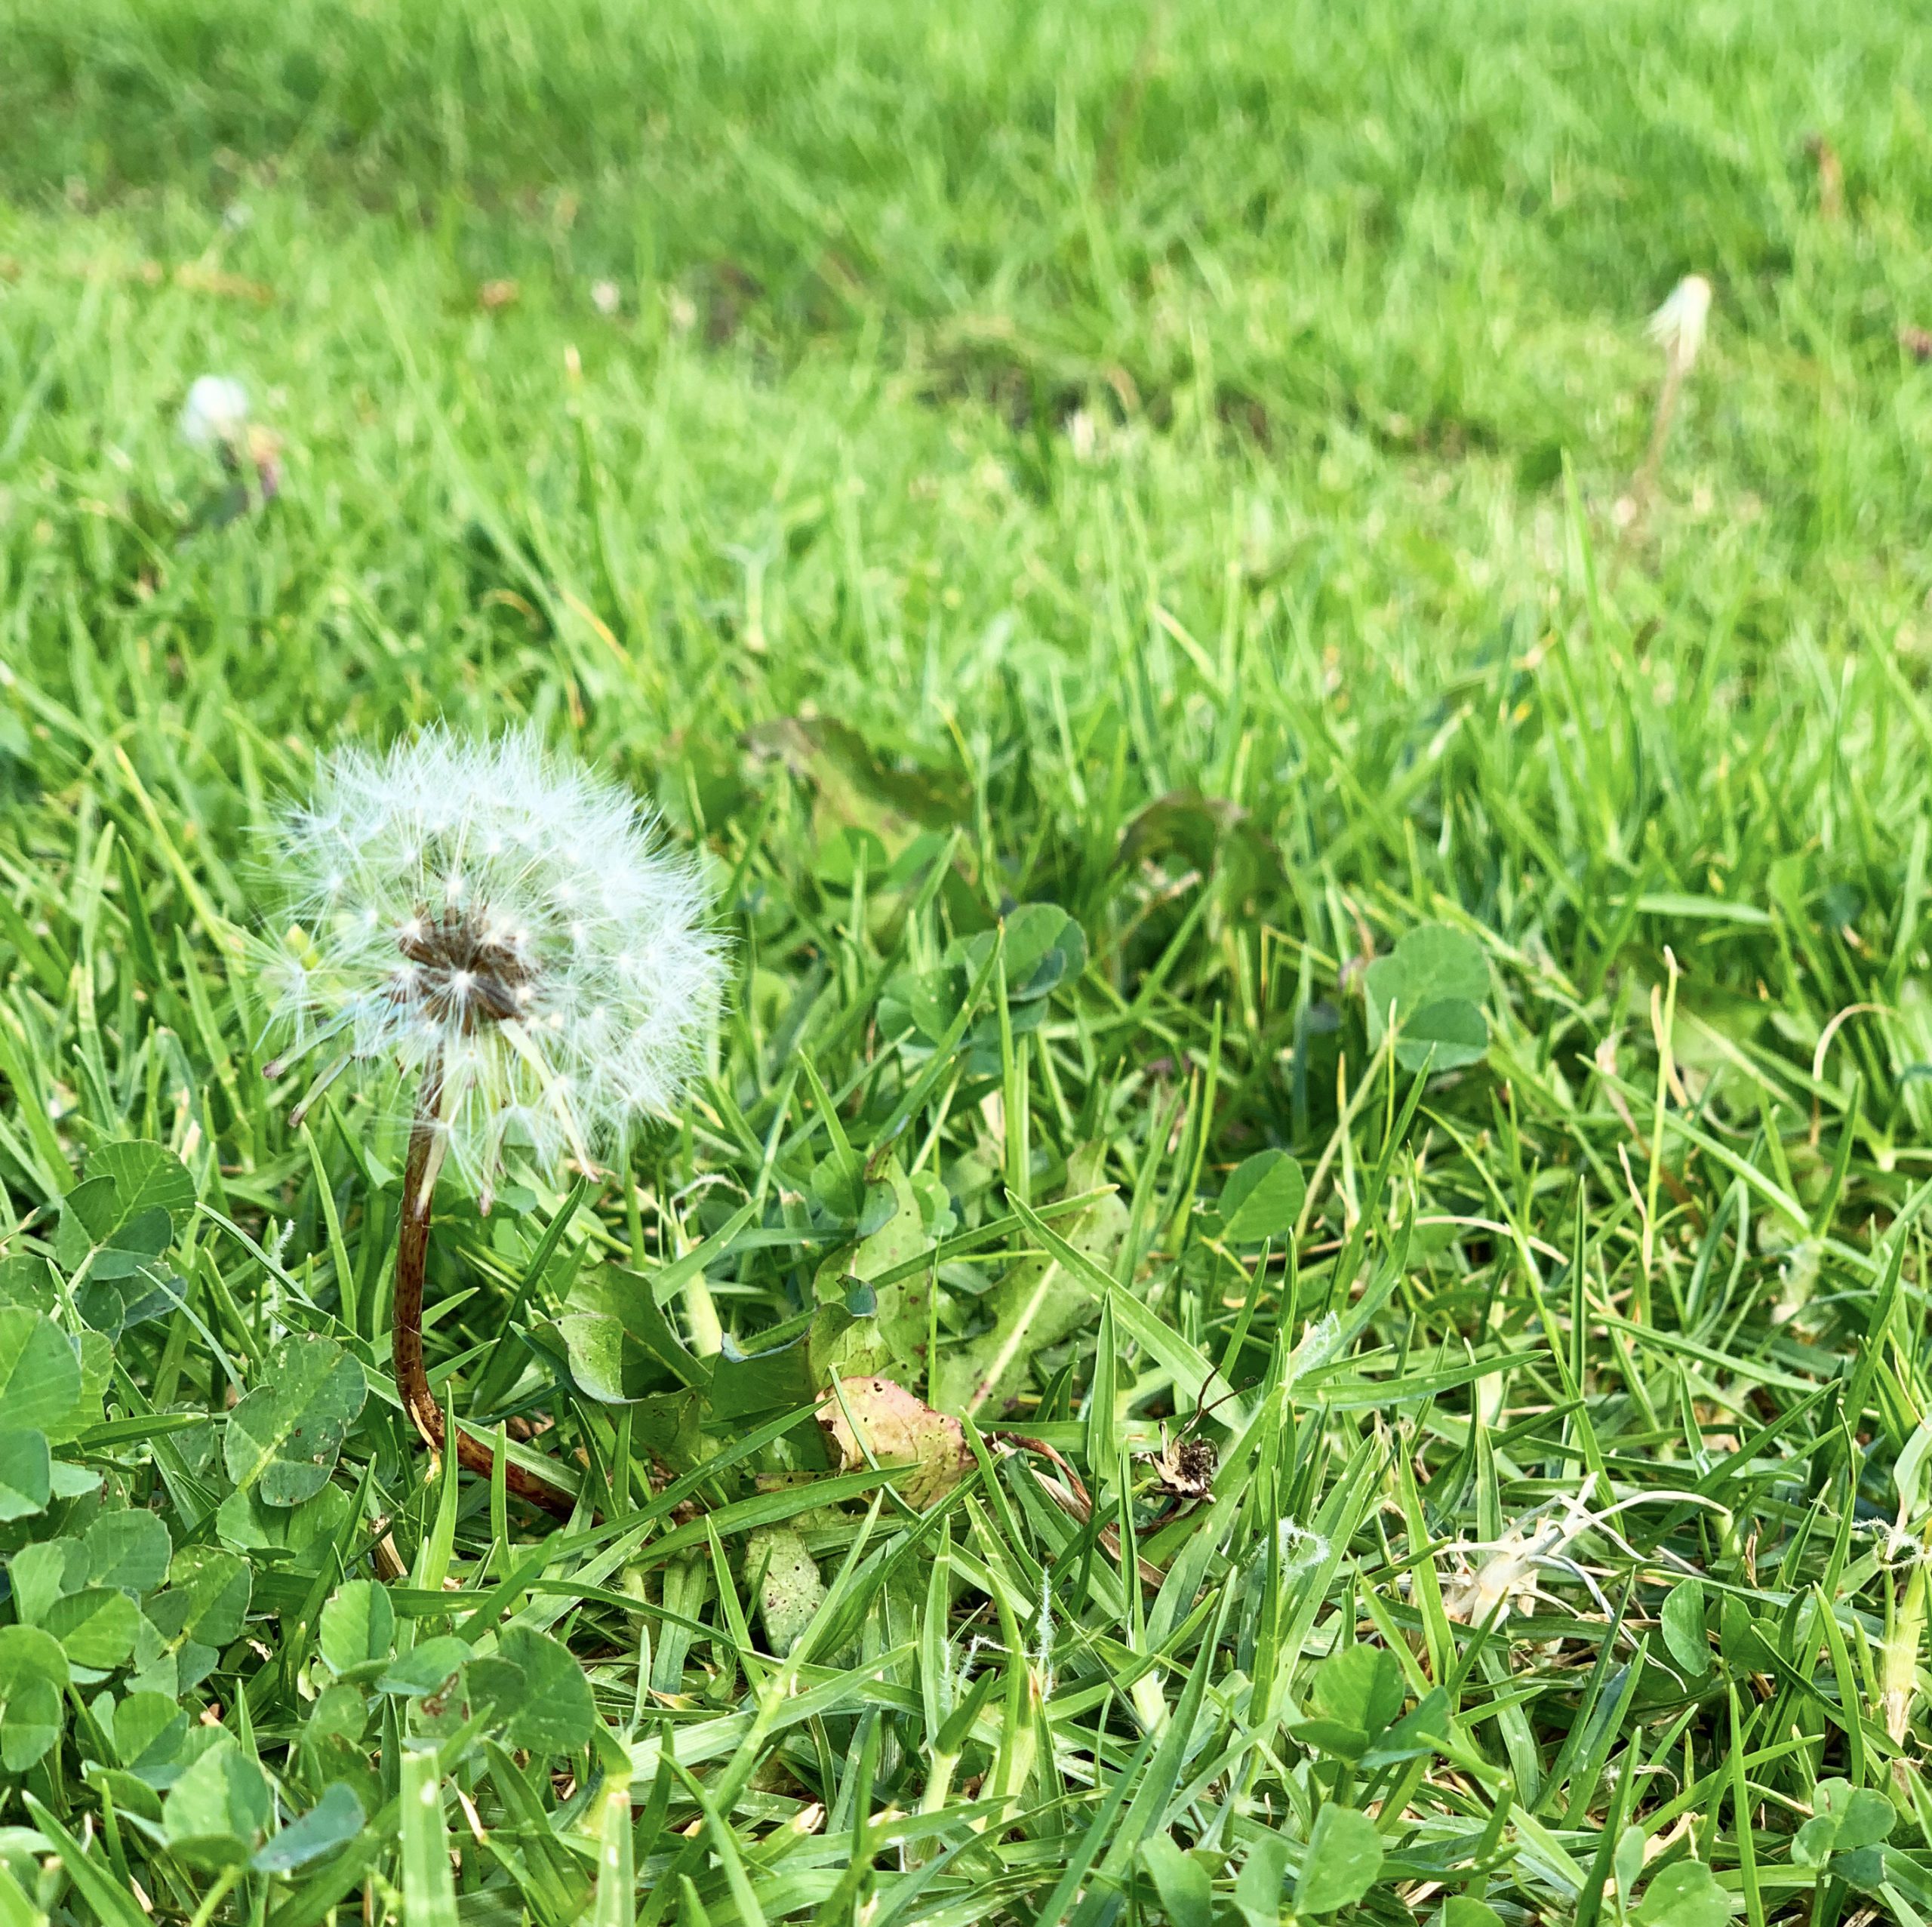 A dandelion growing in a garden with grass